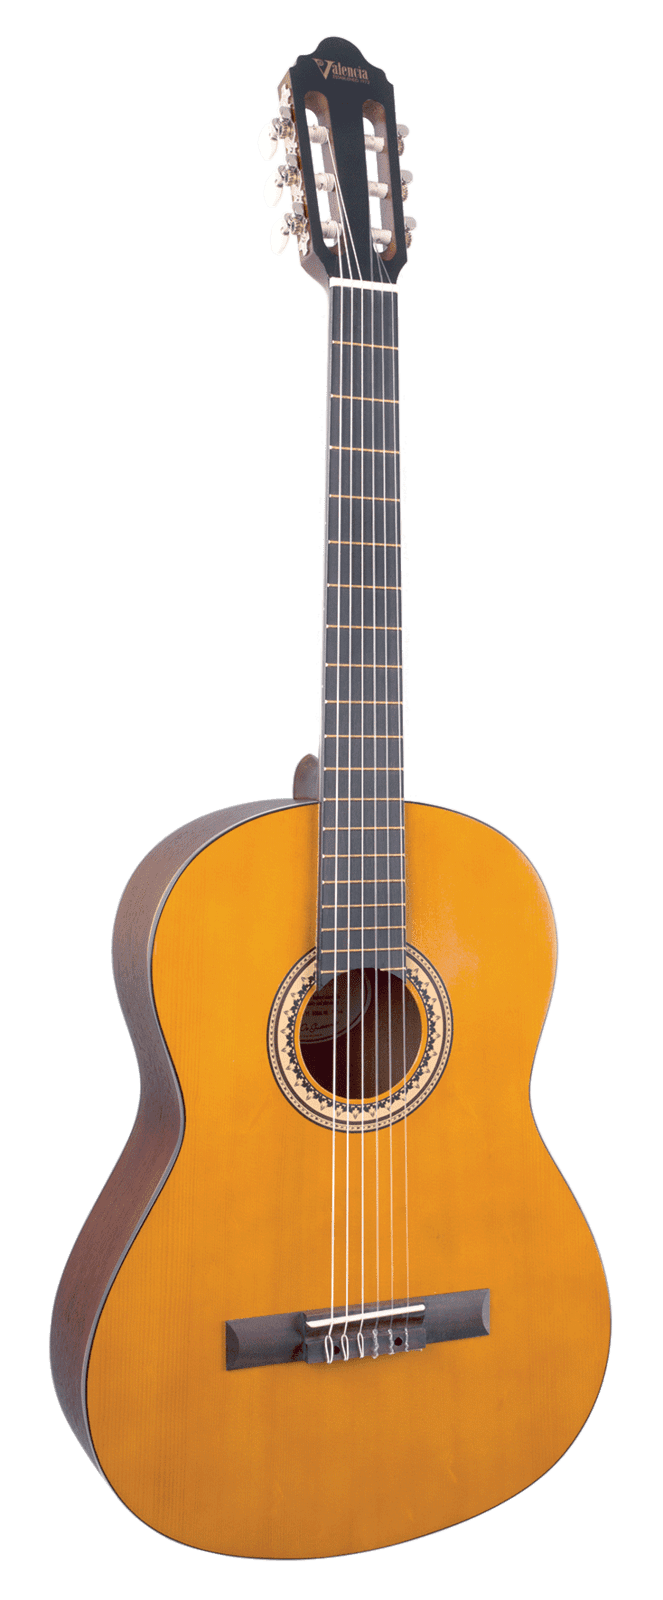 Valencia VC204H Series 200 Hybrid Thin Neck Full Size Classical Guitar Antique Natural